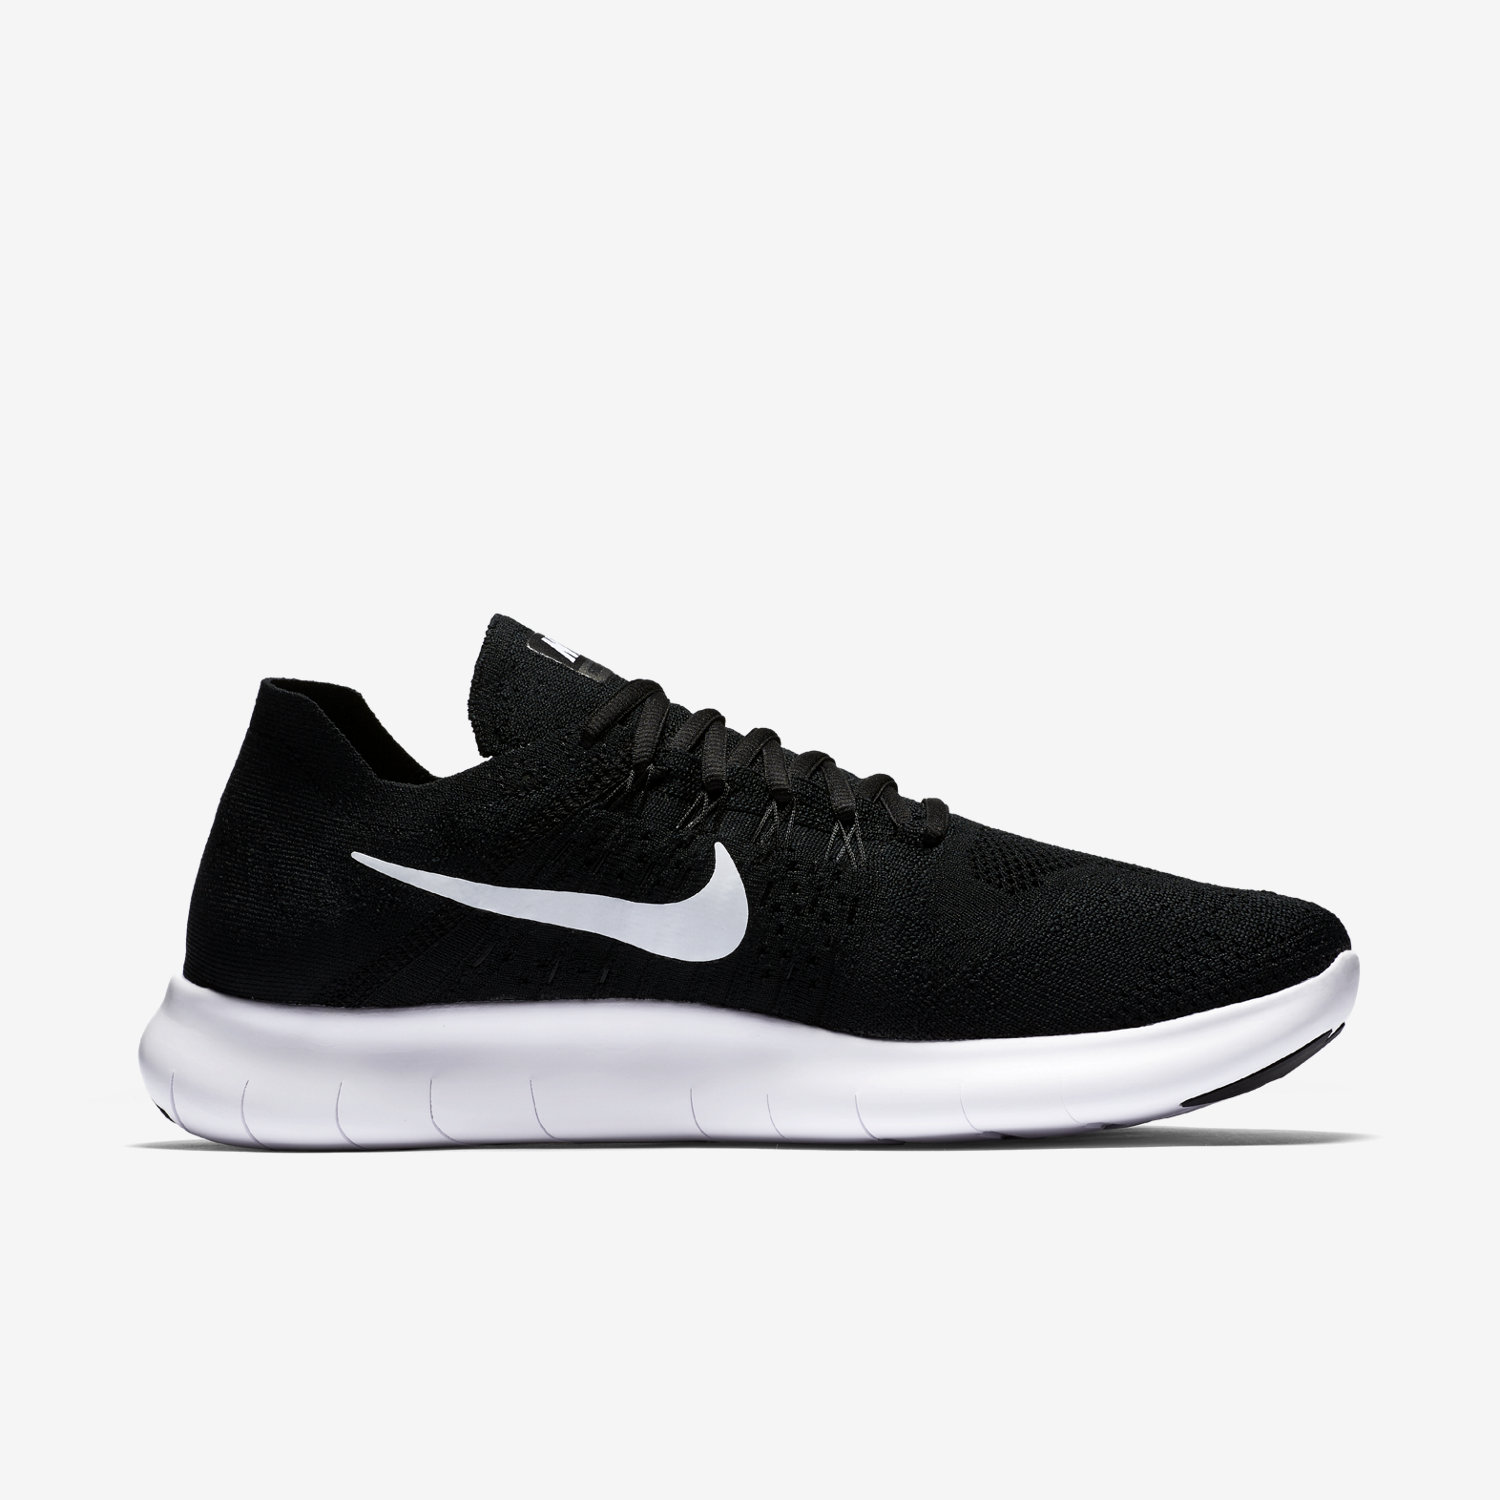 Nike Free Rn Flyknit Chaussures, 